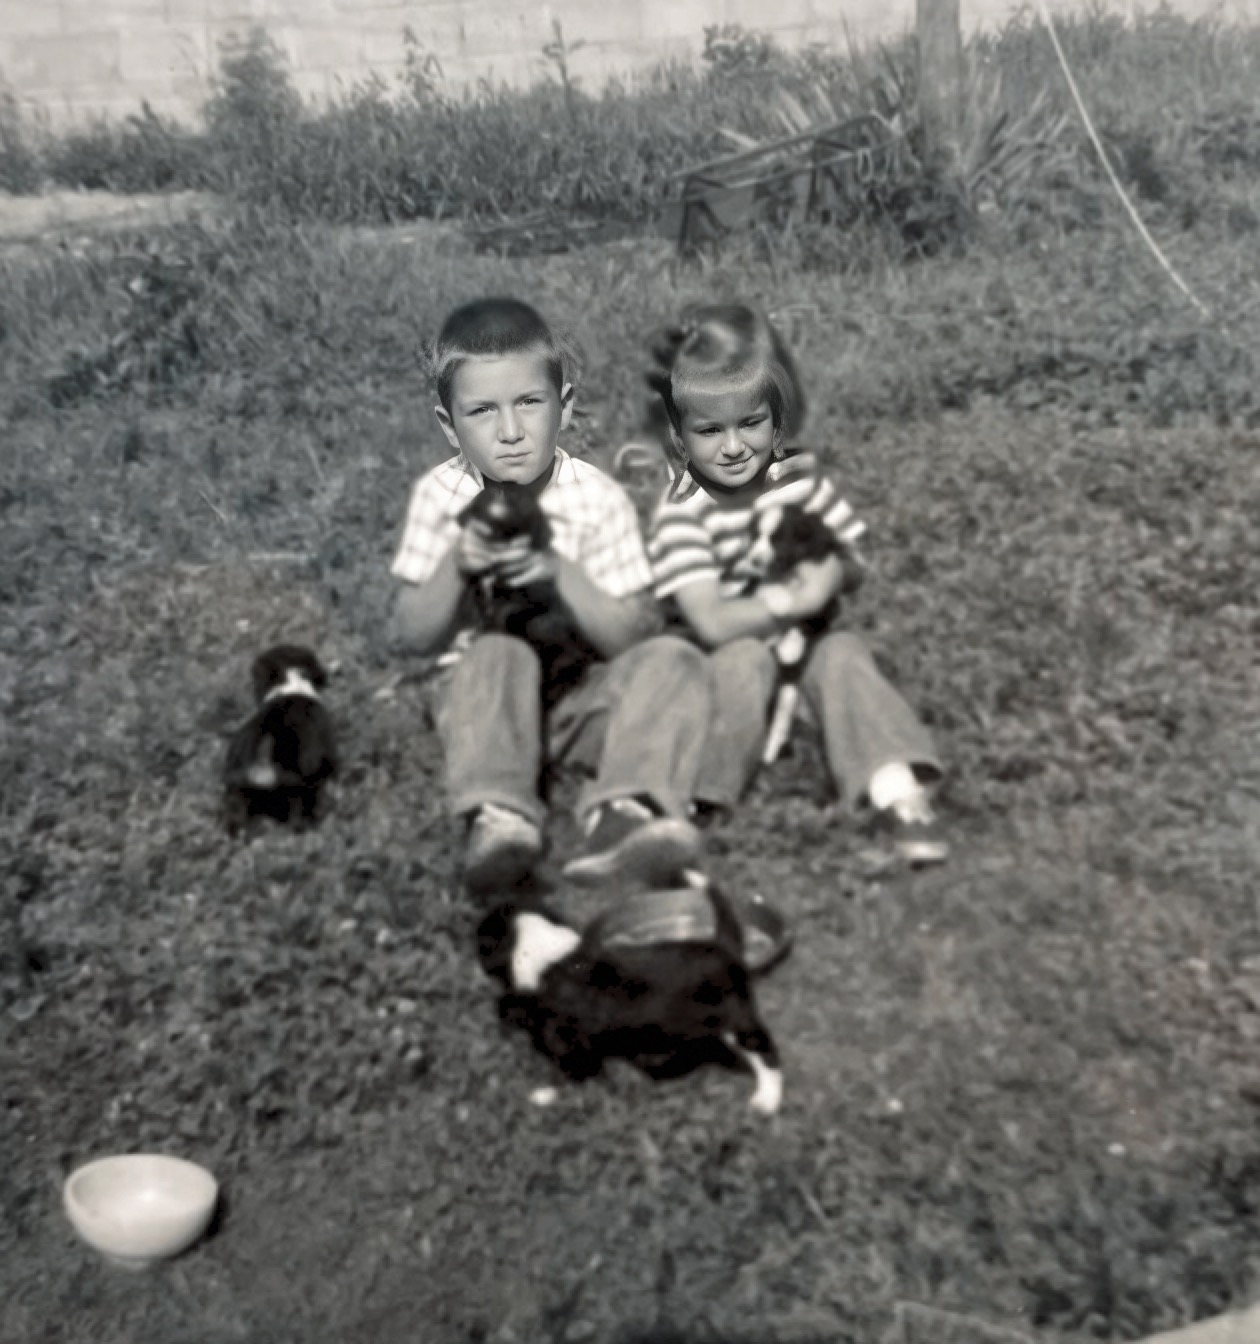 Bob and Mary Lou with puppies Marinette, Wi Early 1950’s